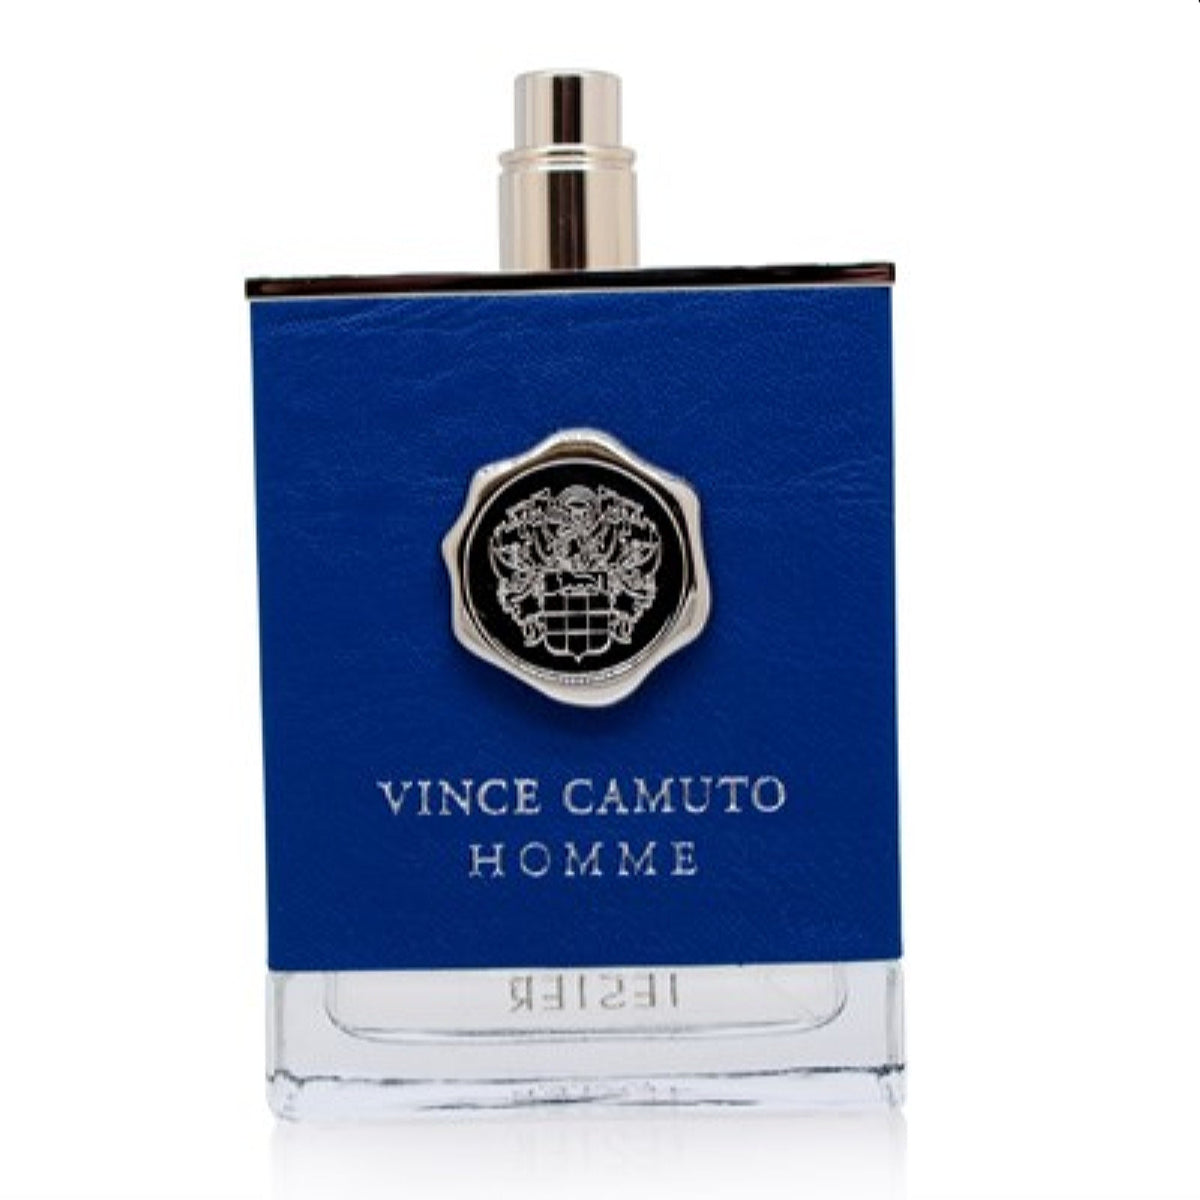 Vince Camuto Homme Vince Camuto Edt Spray No Cap Tester 3.4 Oz (100 Ml) For Men 214676594